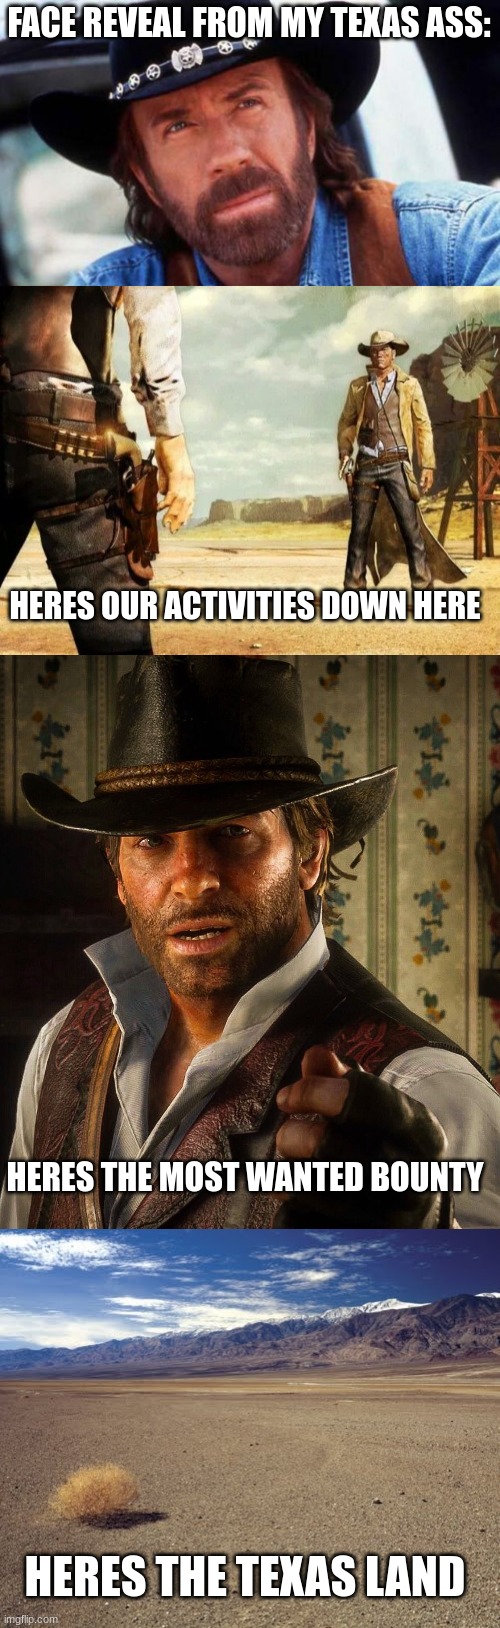 texas screenshots as a person from texas | FACE REVEAL FROM MY TEXAS ASS:; HERES OUR ACTIVITIES DOWN HERE; HERES THE MOST WANTED BOUNTY; HERES THE TEXAS LAND | image tagged in walker texas ranger welcome,wild west shoot out,arthur morgan,desert tumbleweed | made w/ Imgflip meme maker